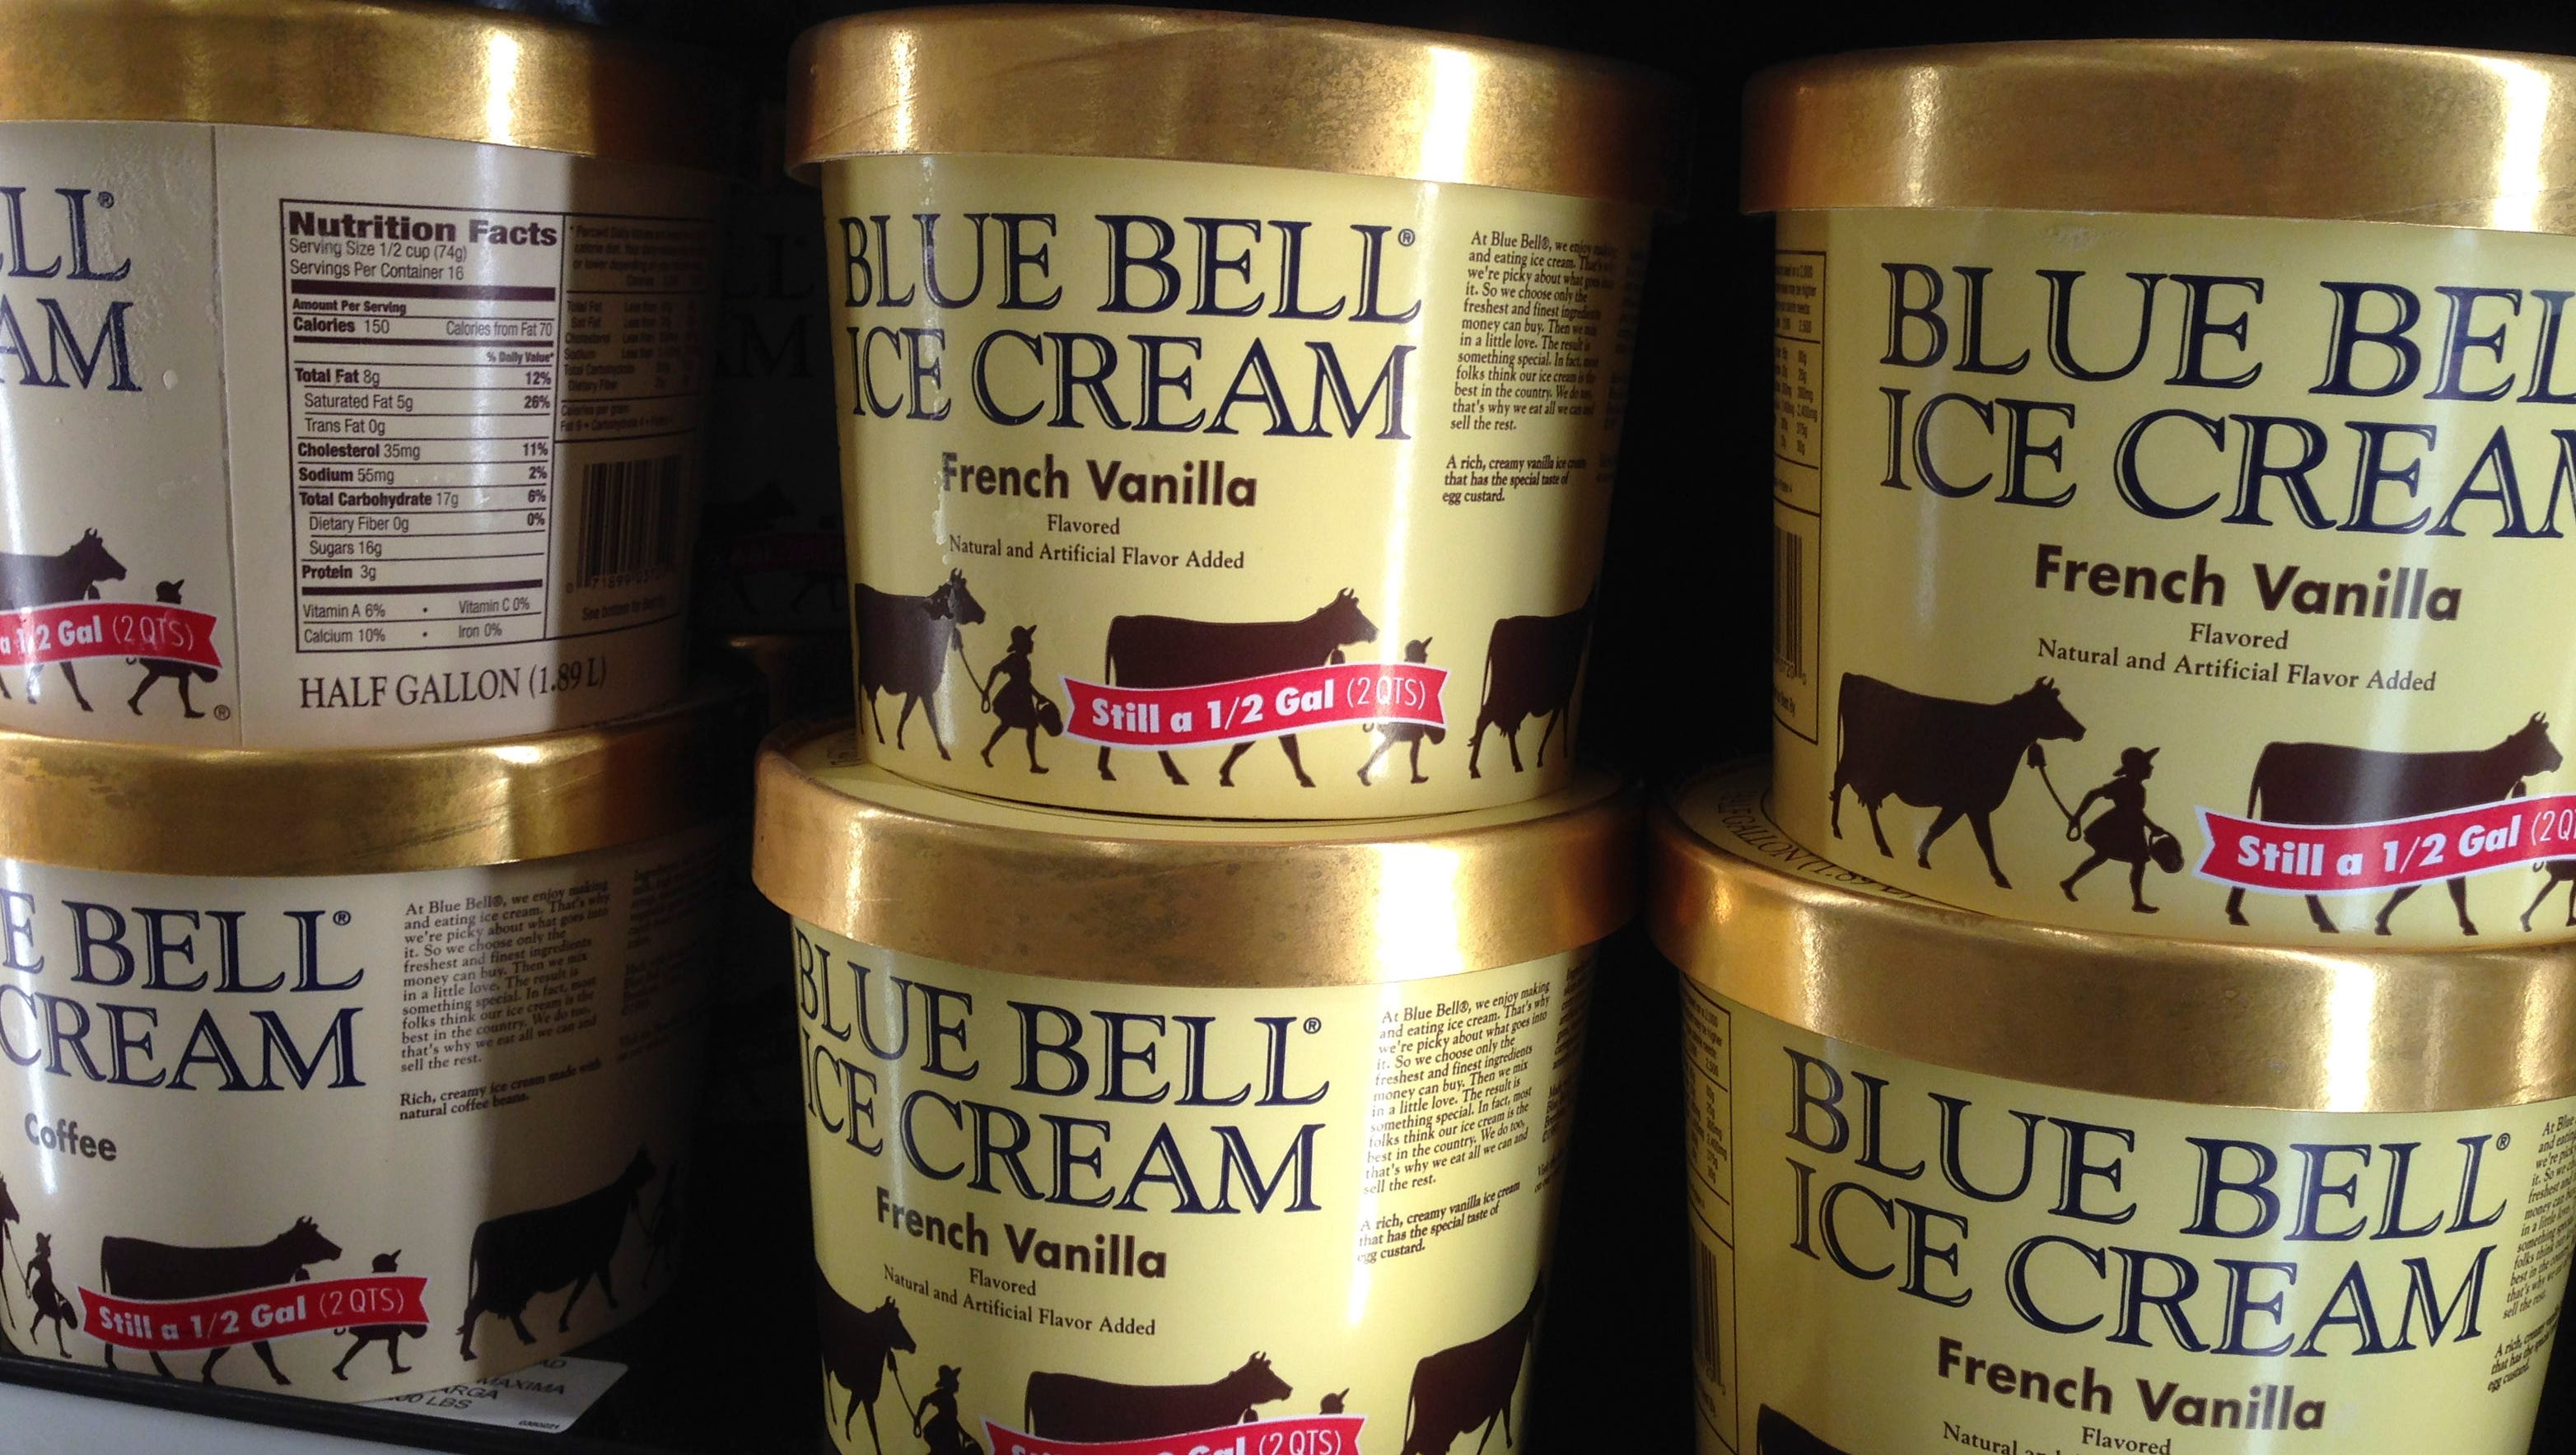 Blue Bell Ice Cream Issues Recall Over Listeria Concerns